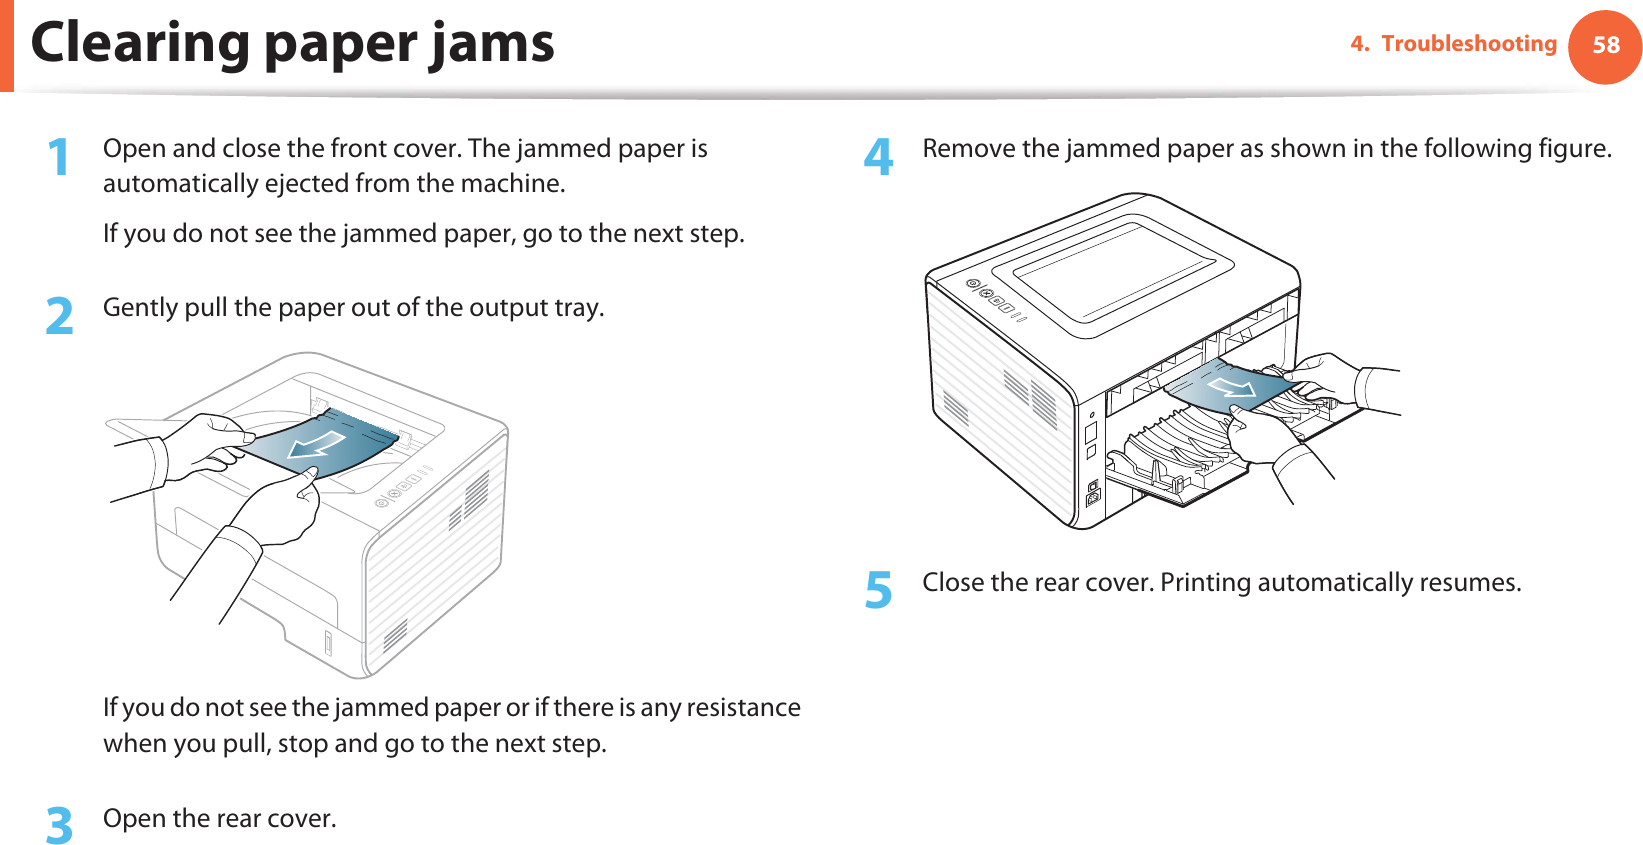 Clearing paper jams 584. Troubleshooting1Open and close the front cover. The jammed paper is automatically ejected from the machine.If you do not see the jammed paper, go to the next step.2  Gently pull the paper out of the output tray.If you do not see the jammed paper or if there is any resistance when you pull, stop and go to the next step.3  Open the rear cover.4  Remove the jammed paper as shown in the following figure.5  Close the rear cover. Printing automatically resumes.